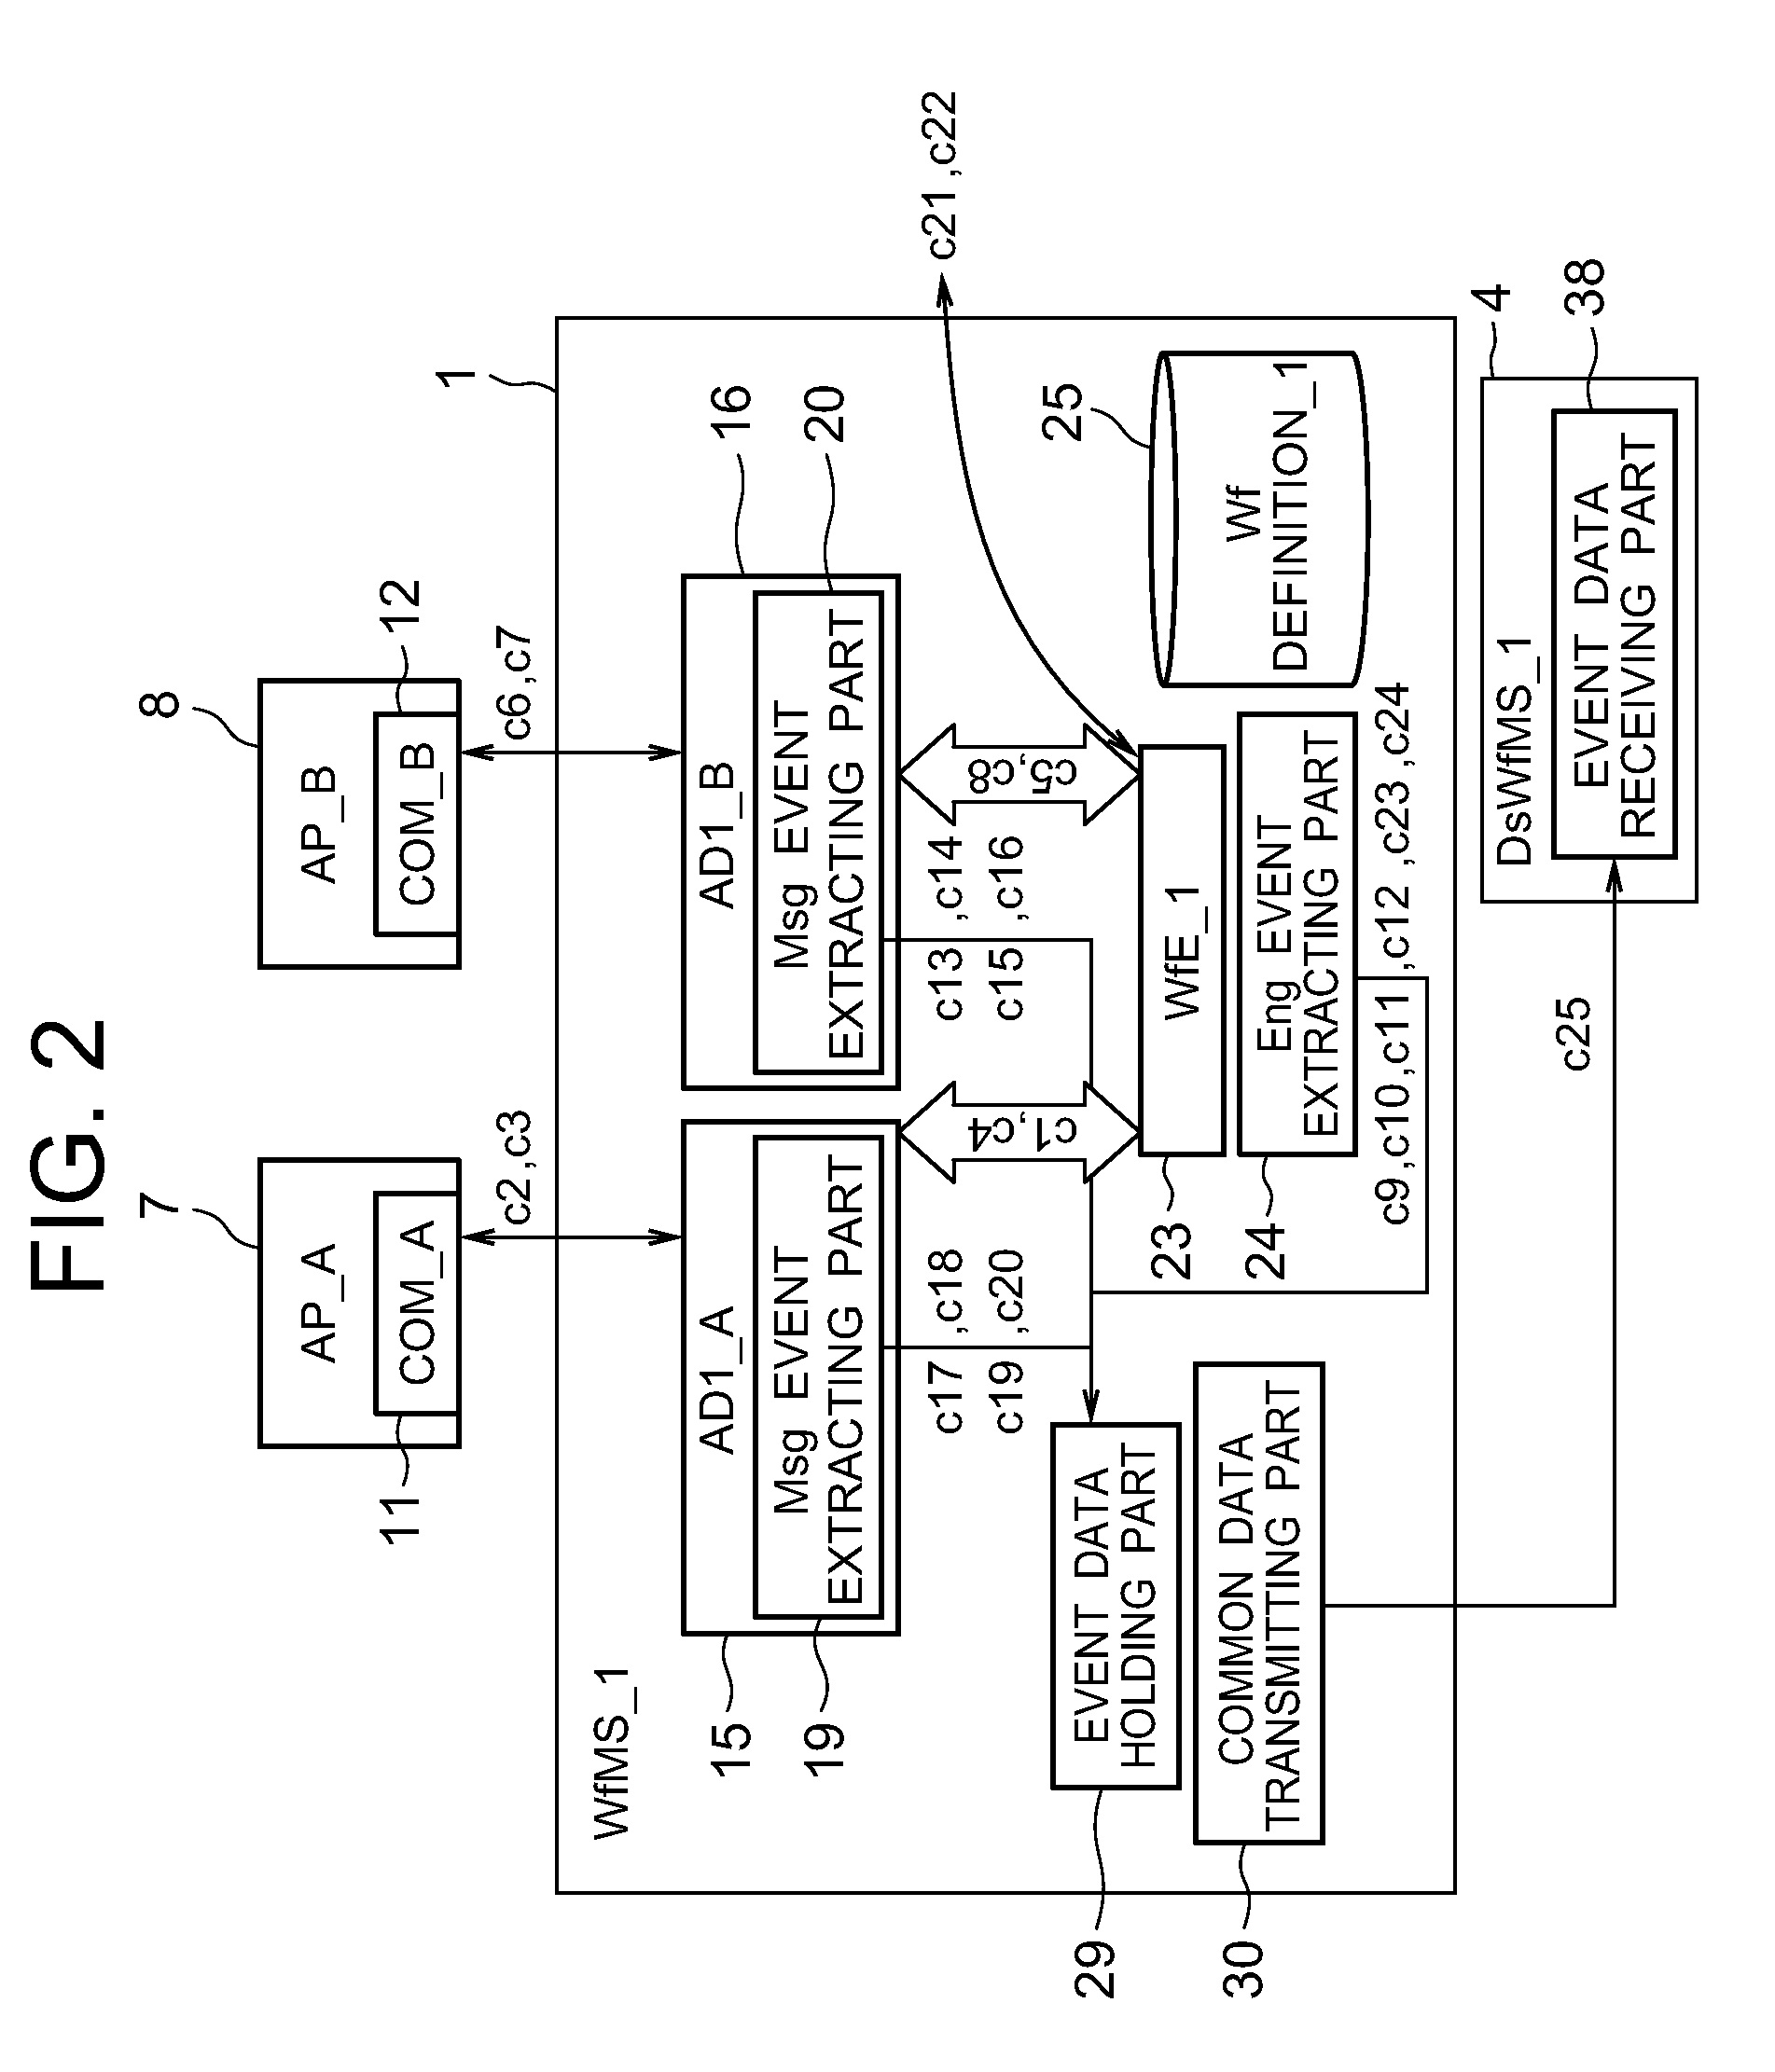 Workflow tracking system, integration management apparatus, method and information recording medium having recorded it